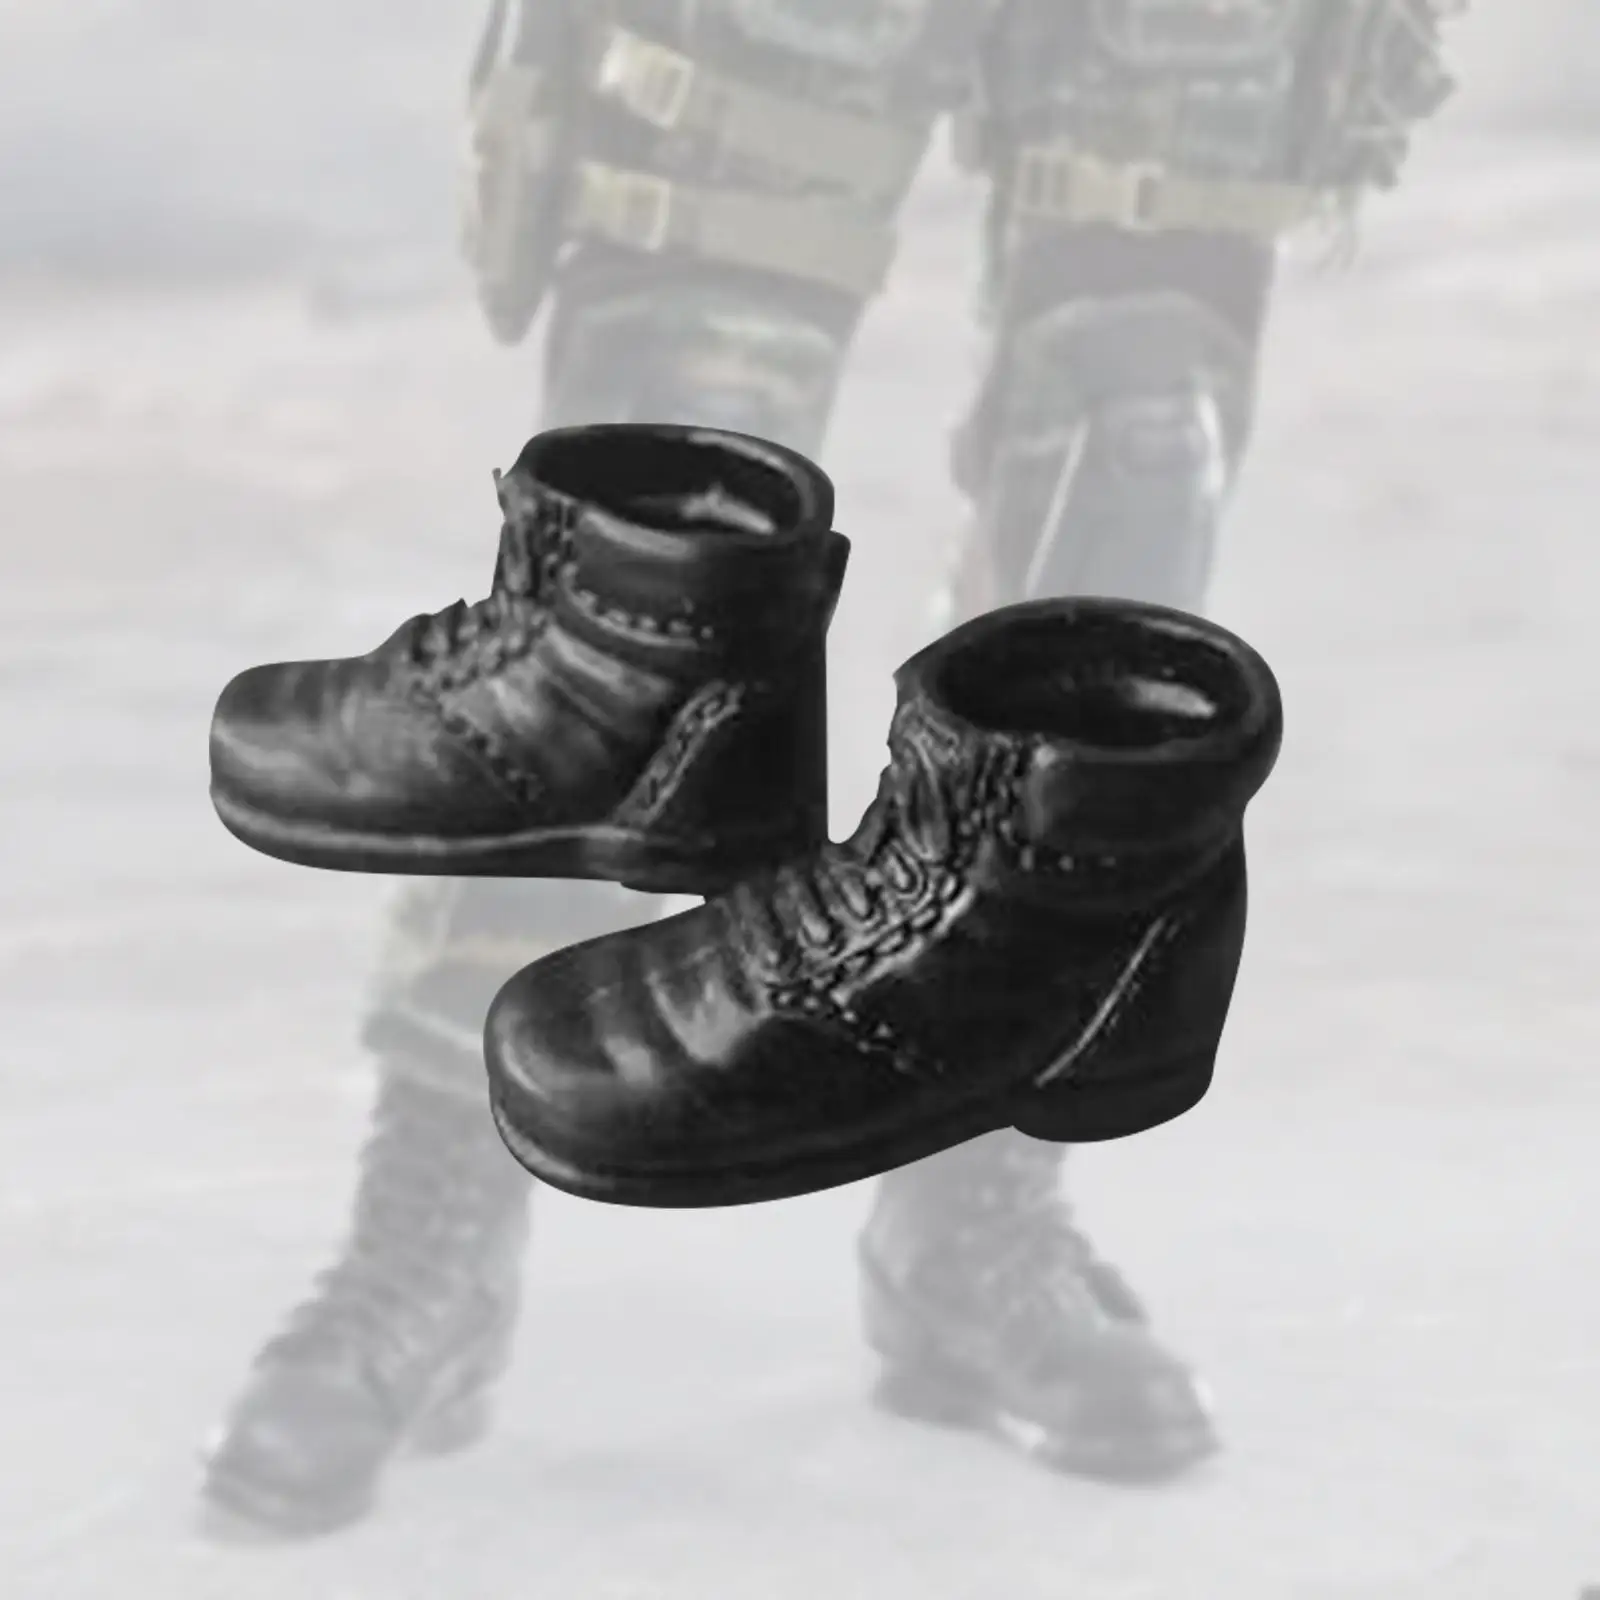 1:6 Scale Miniature Jungle Boots, Female Figure Boots Costume Retro Work Boots for 12`` inch Female Soldier Action Figures